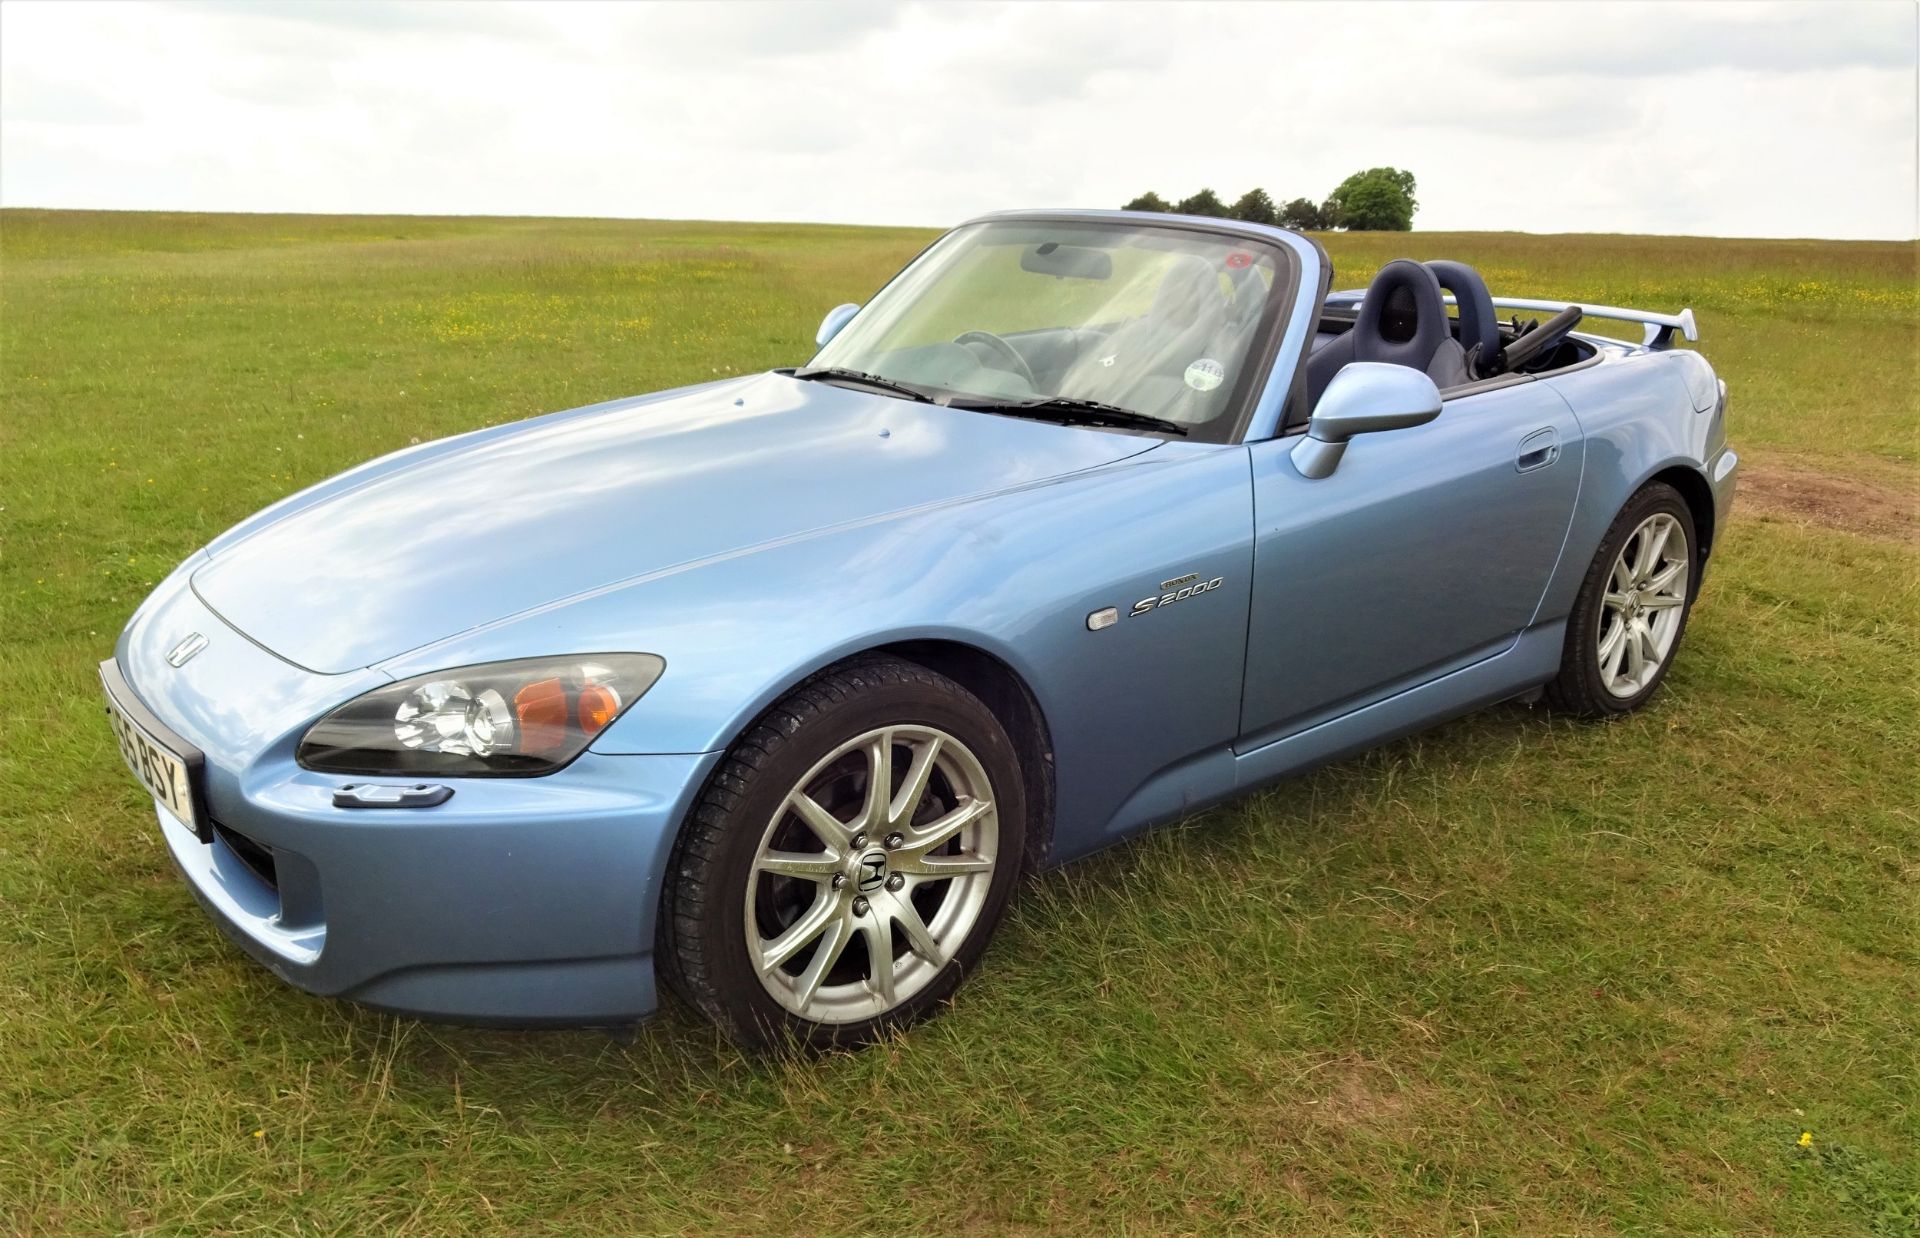 2005 HONDA S2000 Registration Number: RJ55 BSY Chassis Number: JHMPA11305S202028 - In current - Image 3 of 15